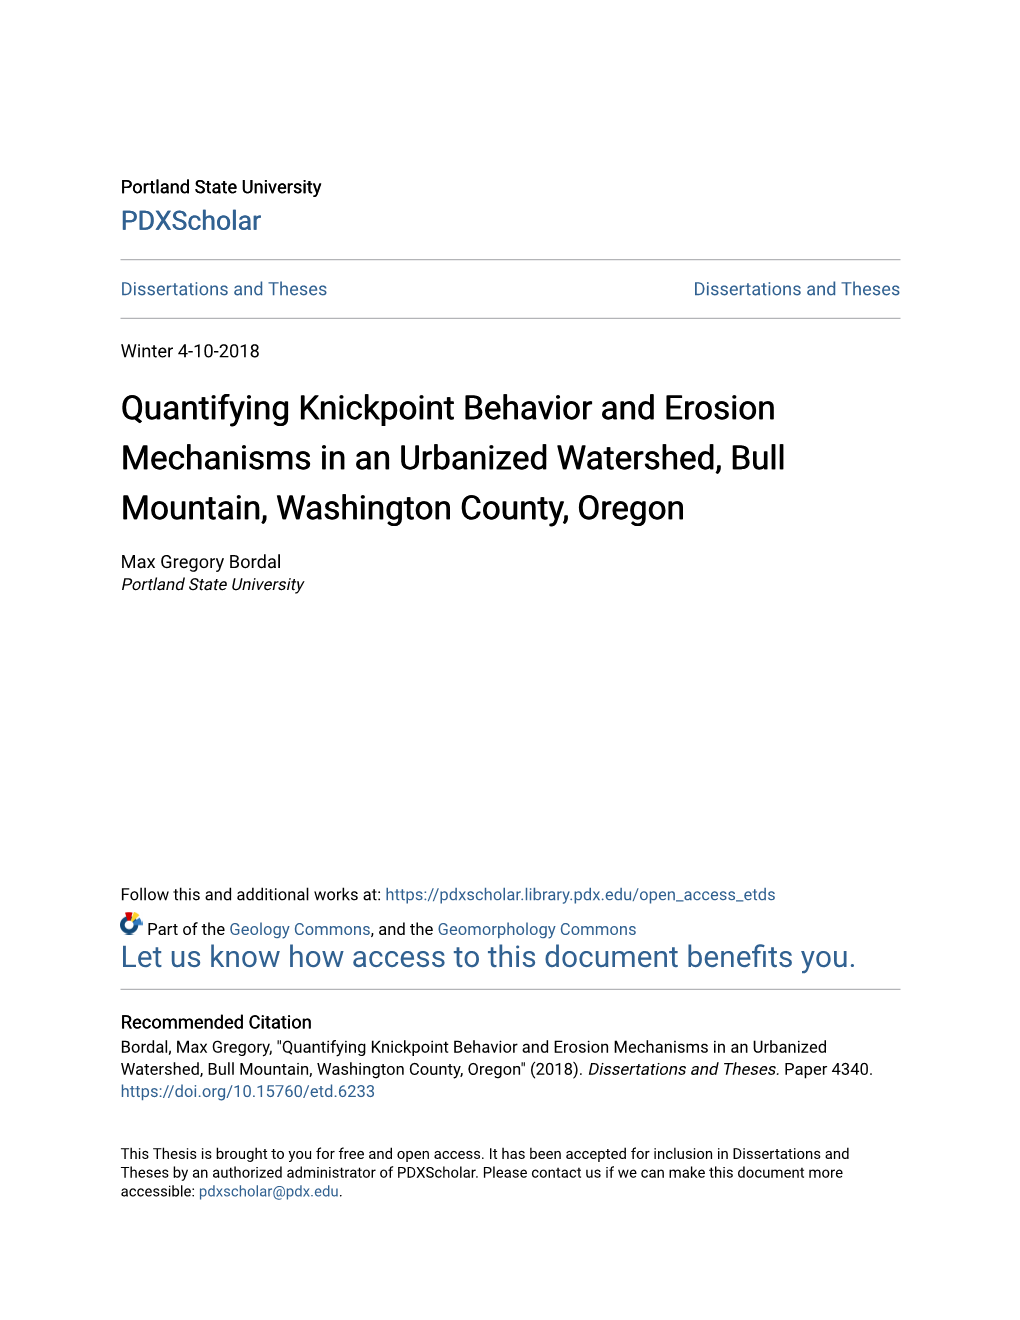 Quantifying Knickpoint Behavior and Erosion Mechanisms in an Urbanized Watershed, Bull Mountain, Washington County, Oregon